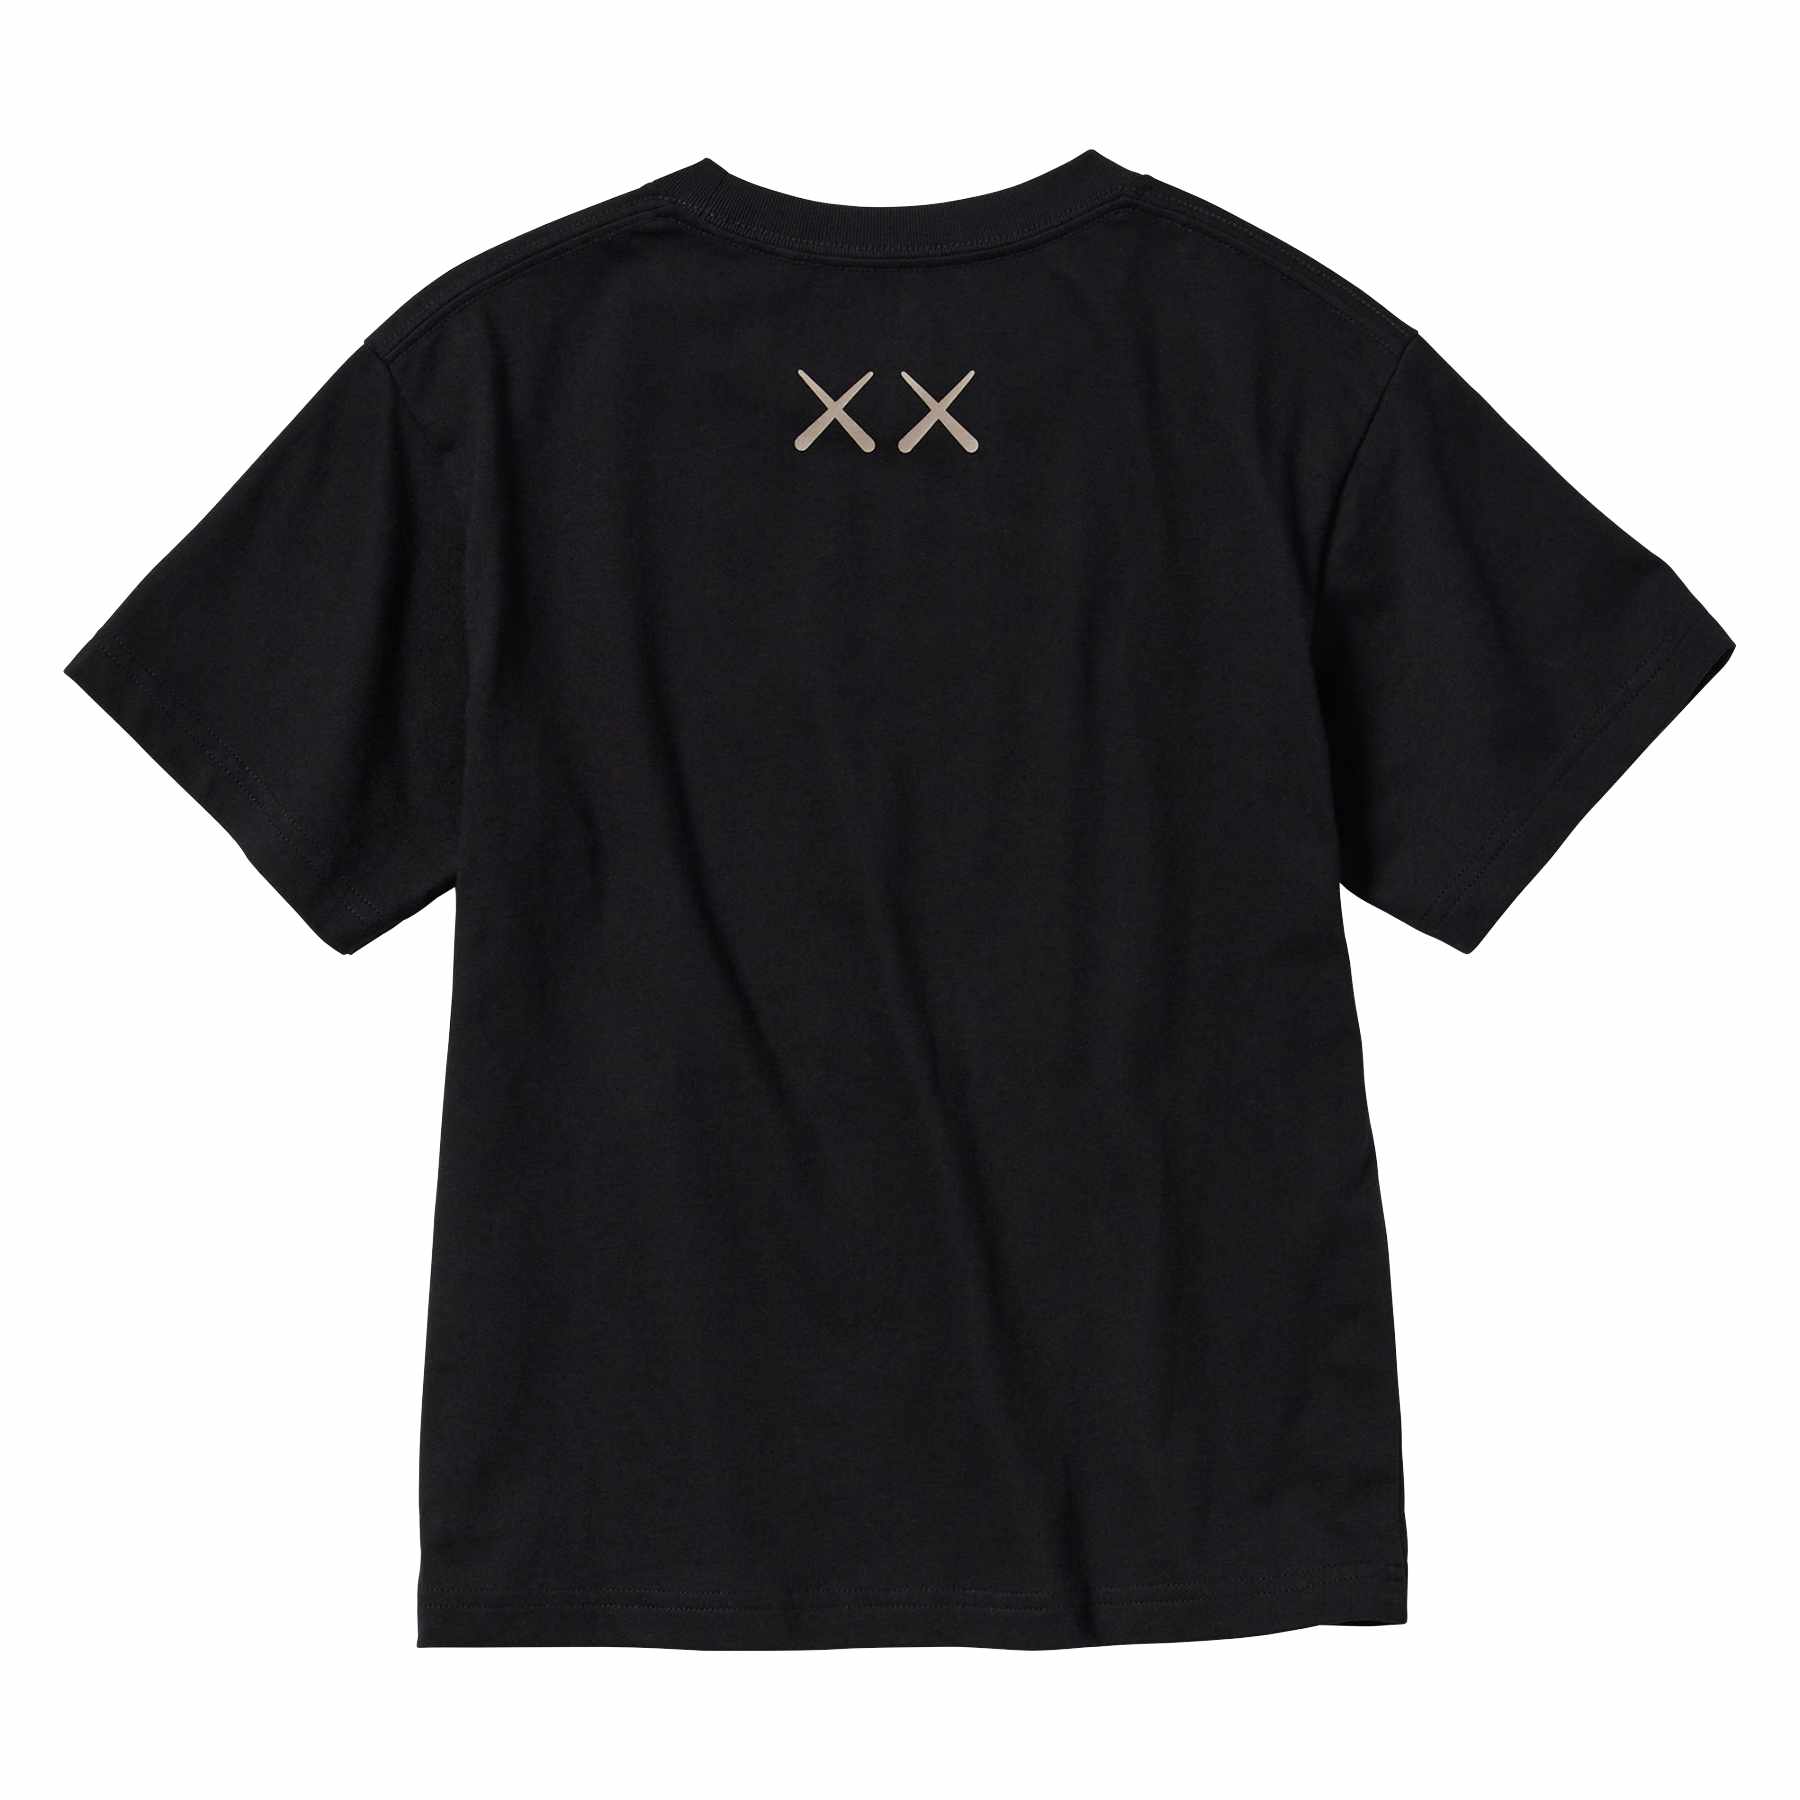 A black KAWS x UNIQLO T-shirt printed with a 'What Party" artwork